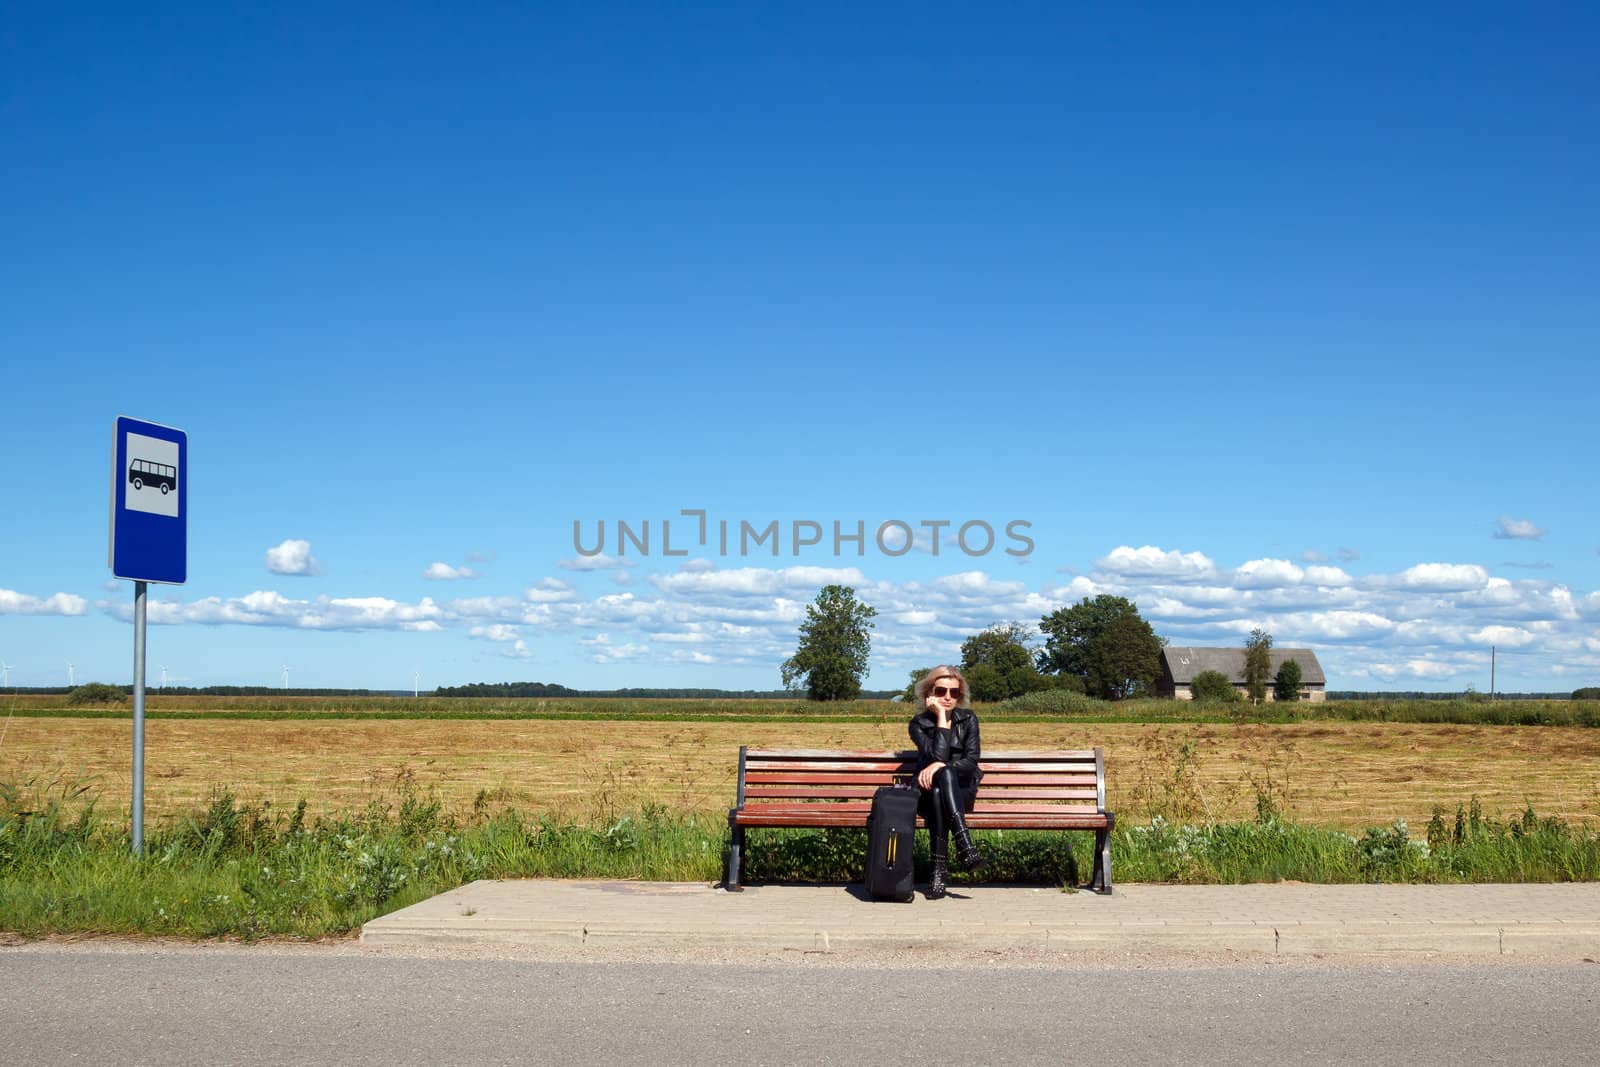 lonely bus stop at countryside with women on bench